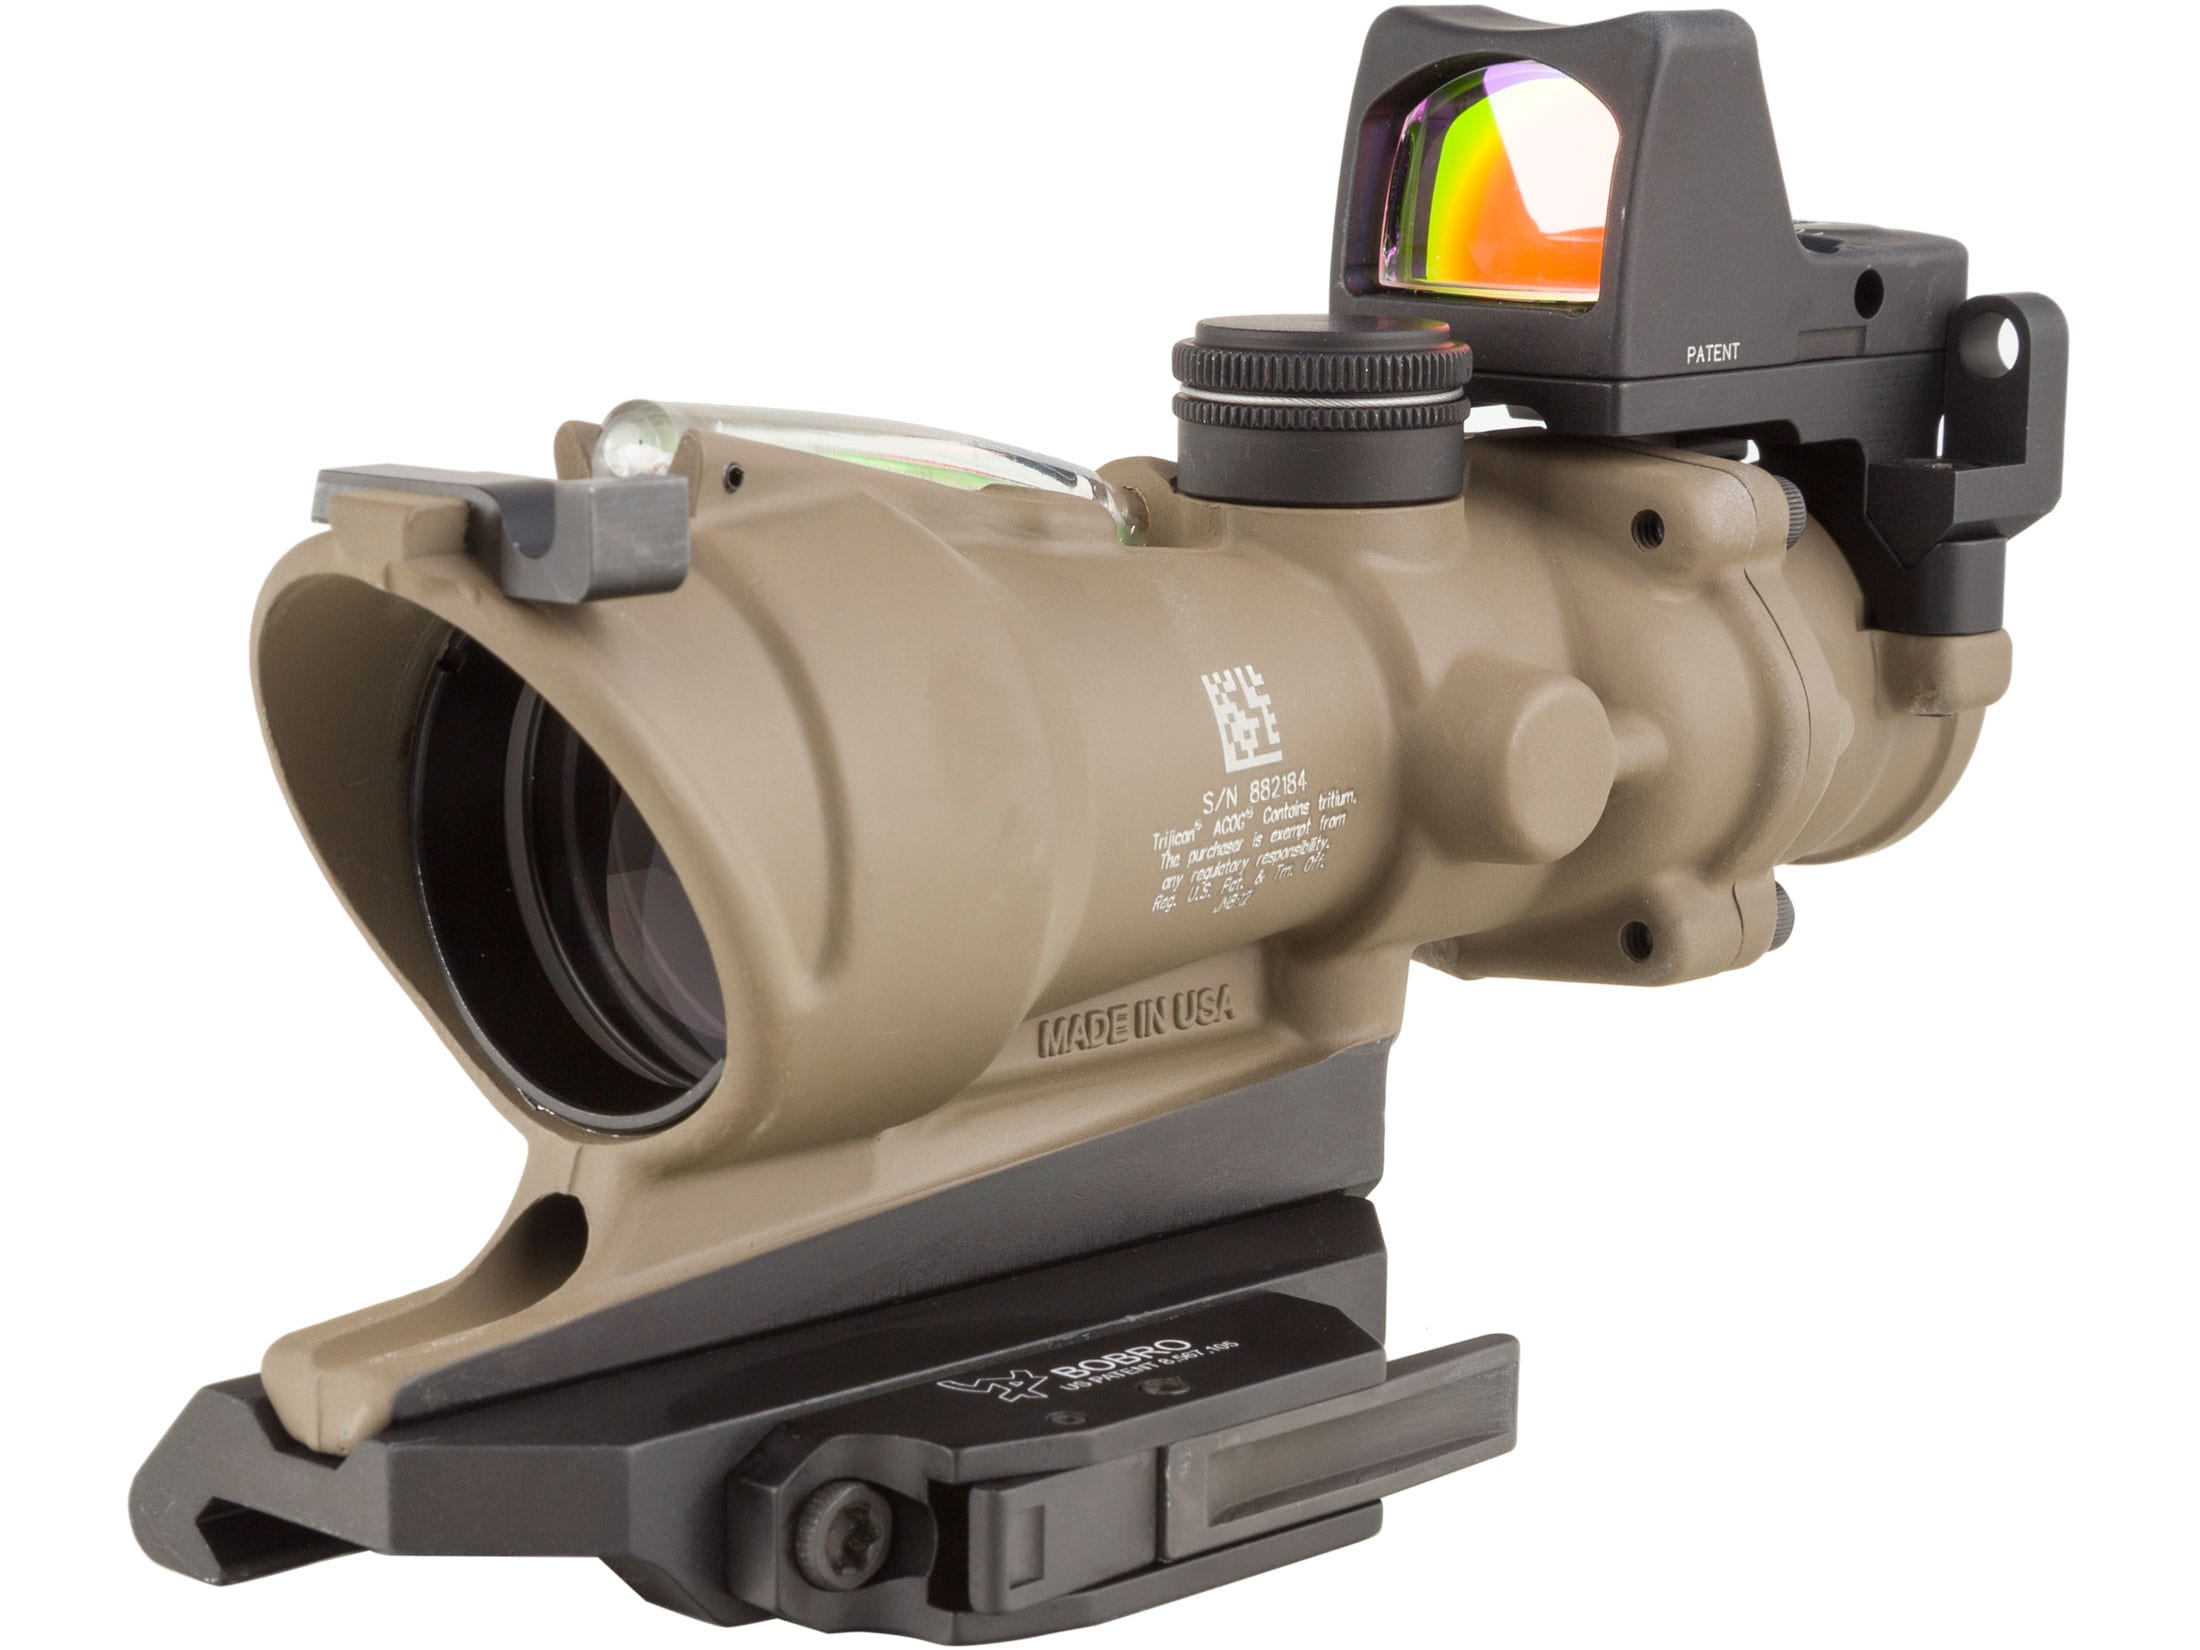 Trijicon ACOG Rifle Scope 4x 32mm Dual-Illuminated 5.56 Reticle with 3.25 MOA RMR Type 2 Red Dot Sight, Iron Sight and Trijicon Quick Release Mount Cerakote Flat Dark Earth For Sale